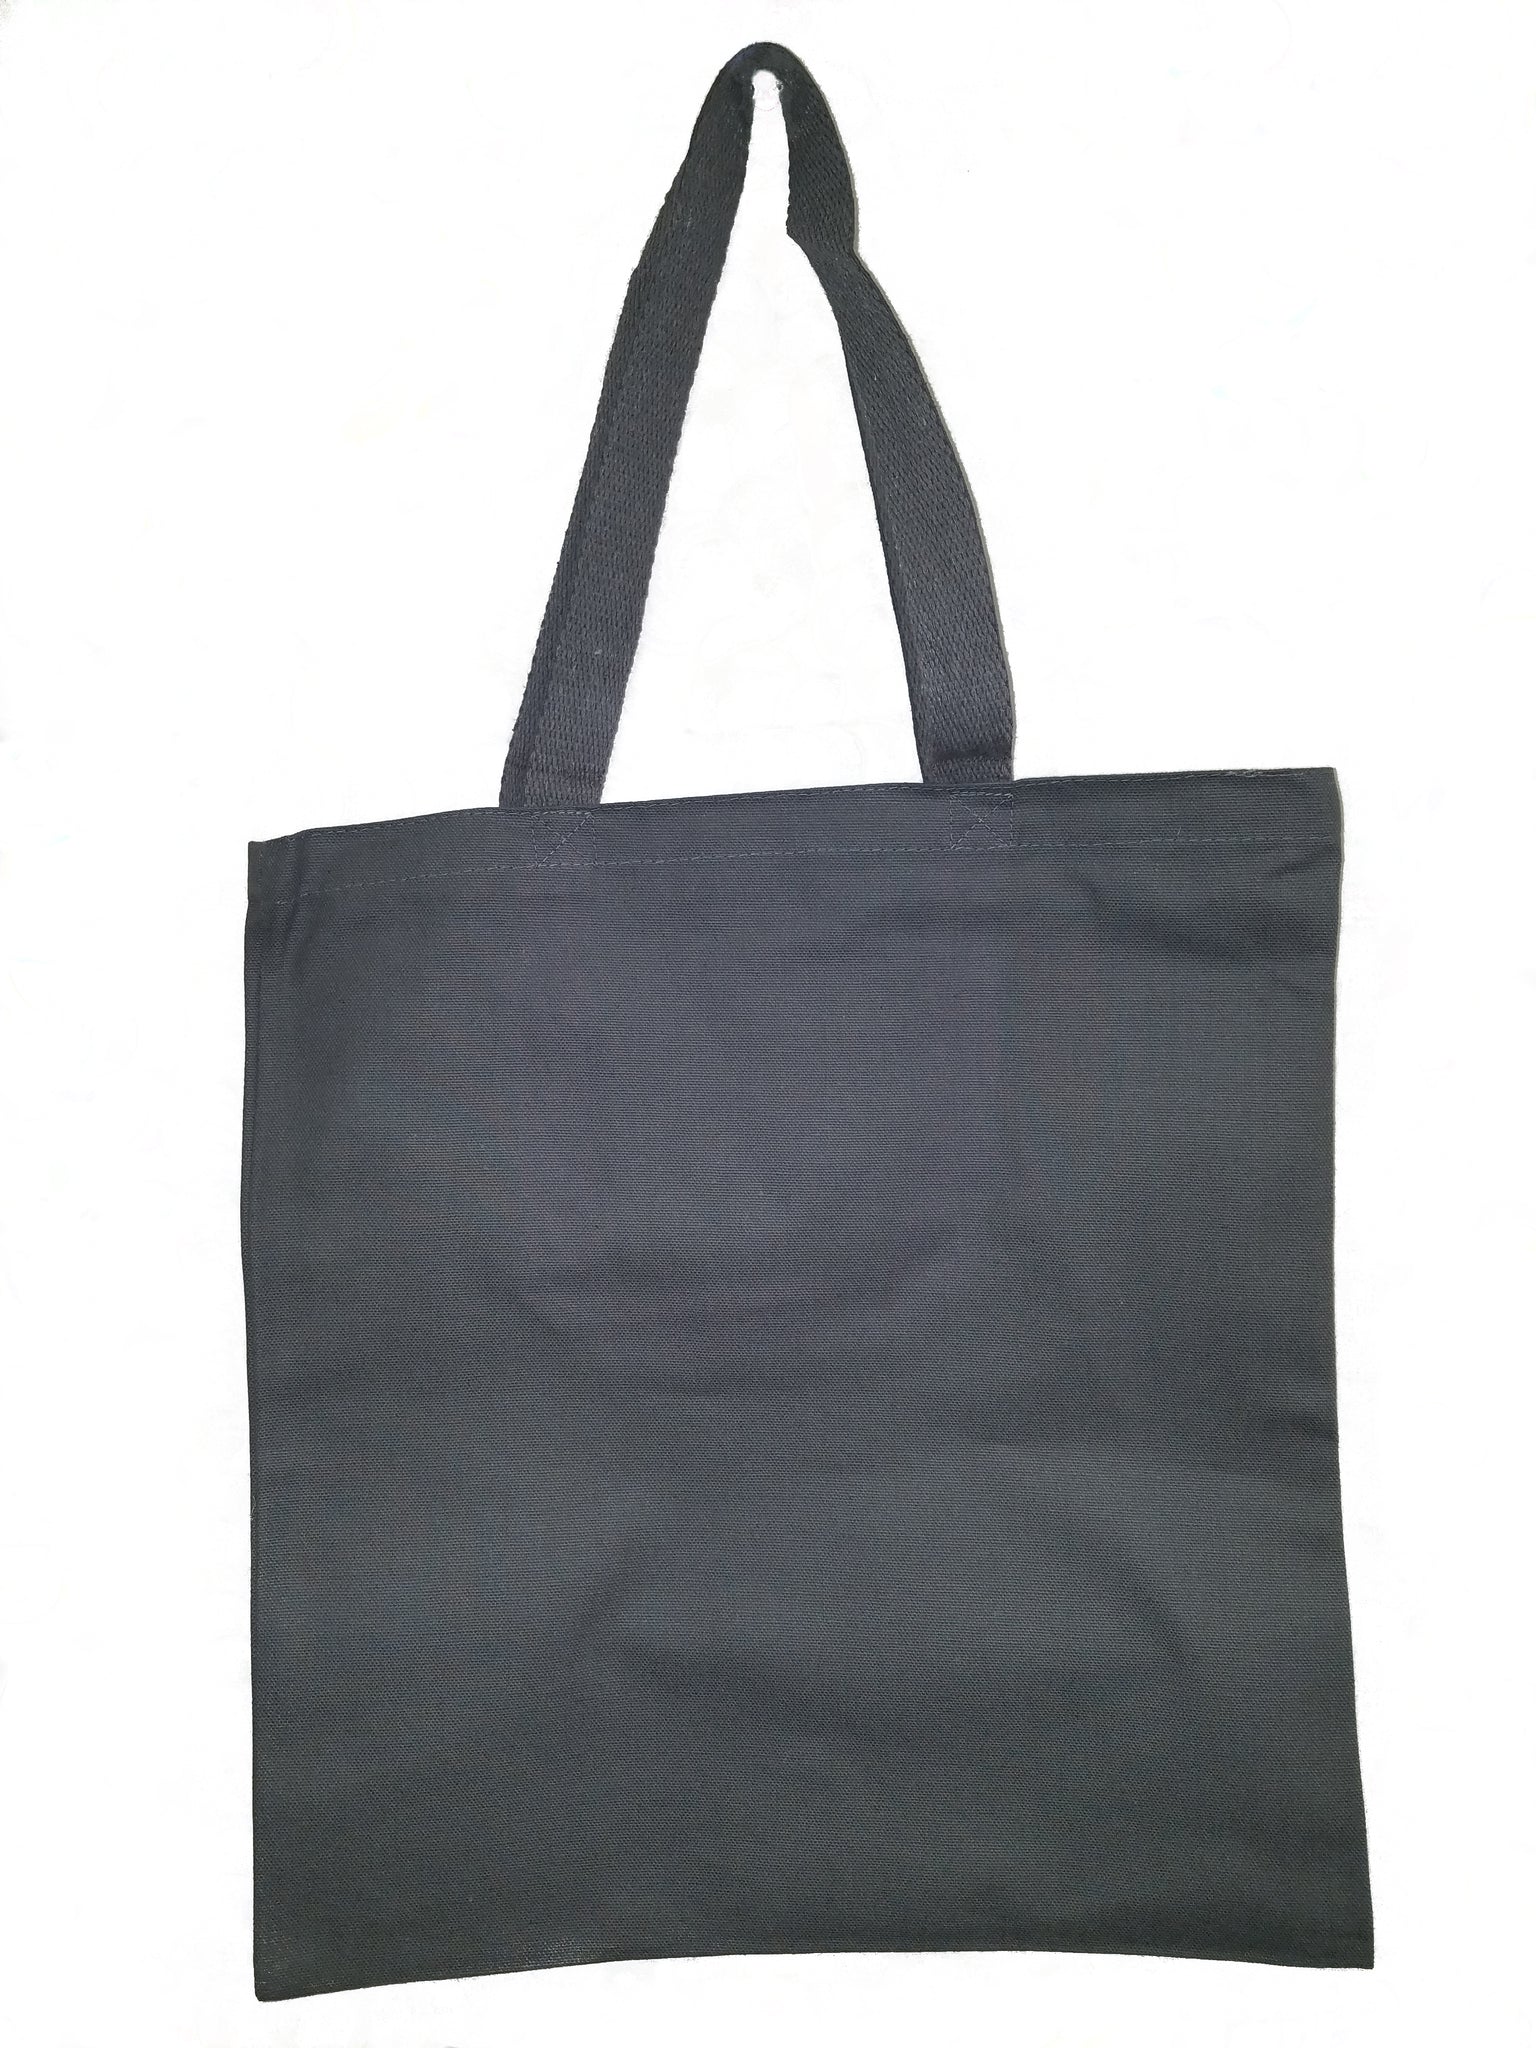 Segarty Canvas Tote Bag with Zipper, 6 PACK 19.7 x India | Ubuy